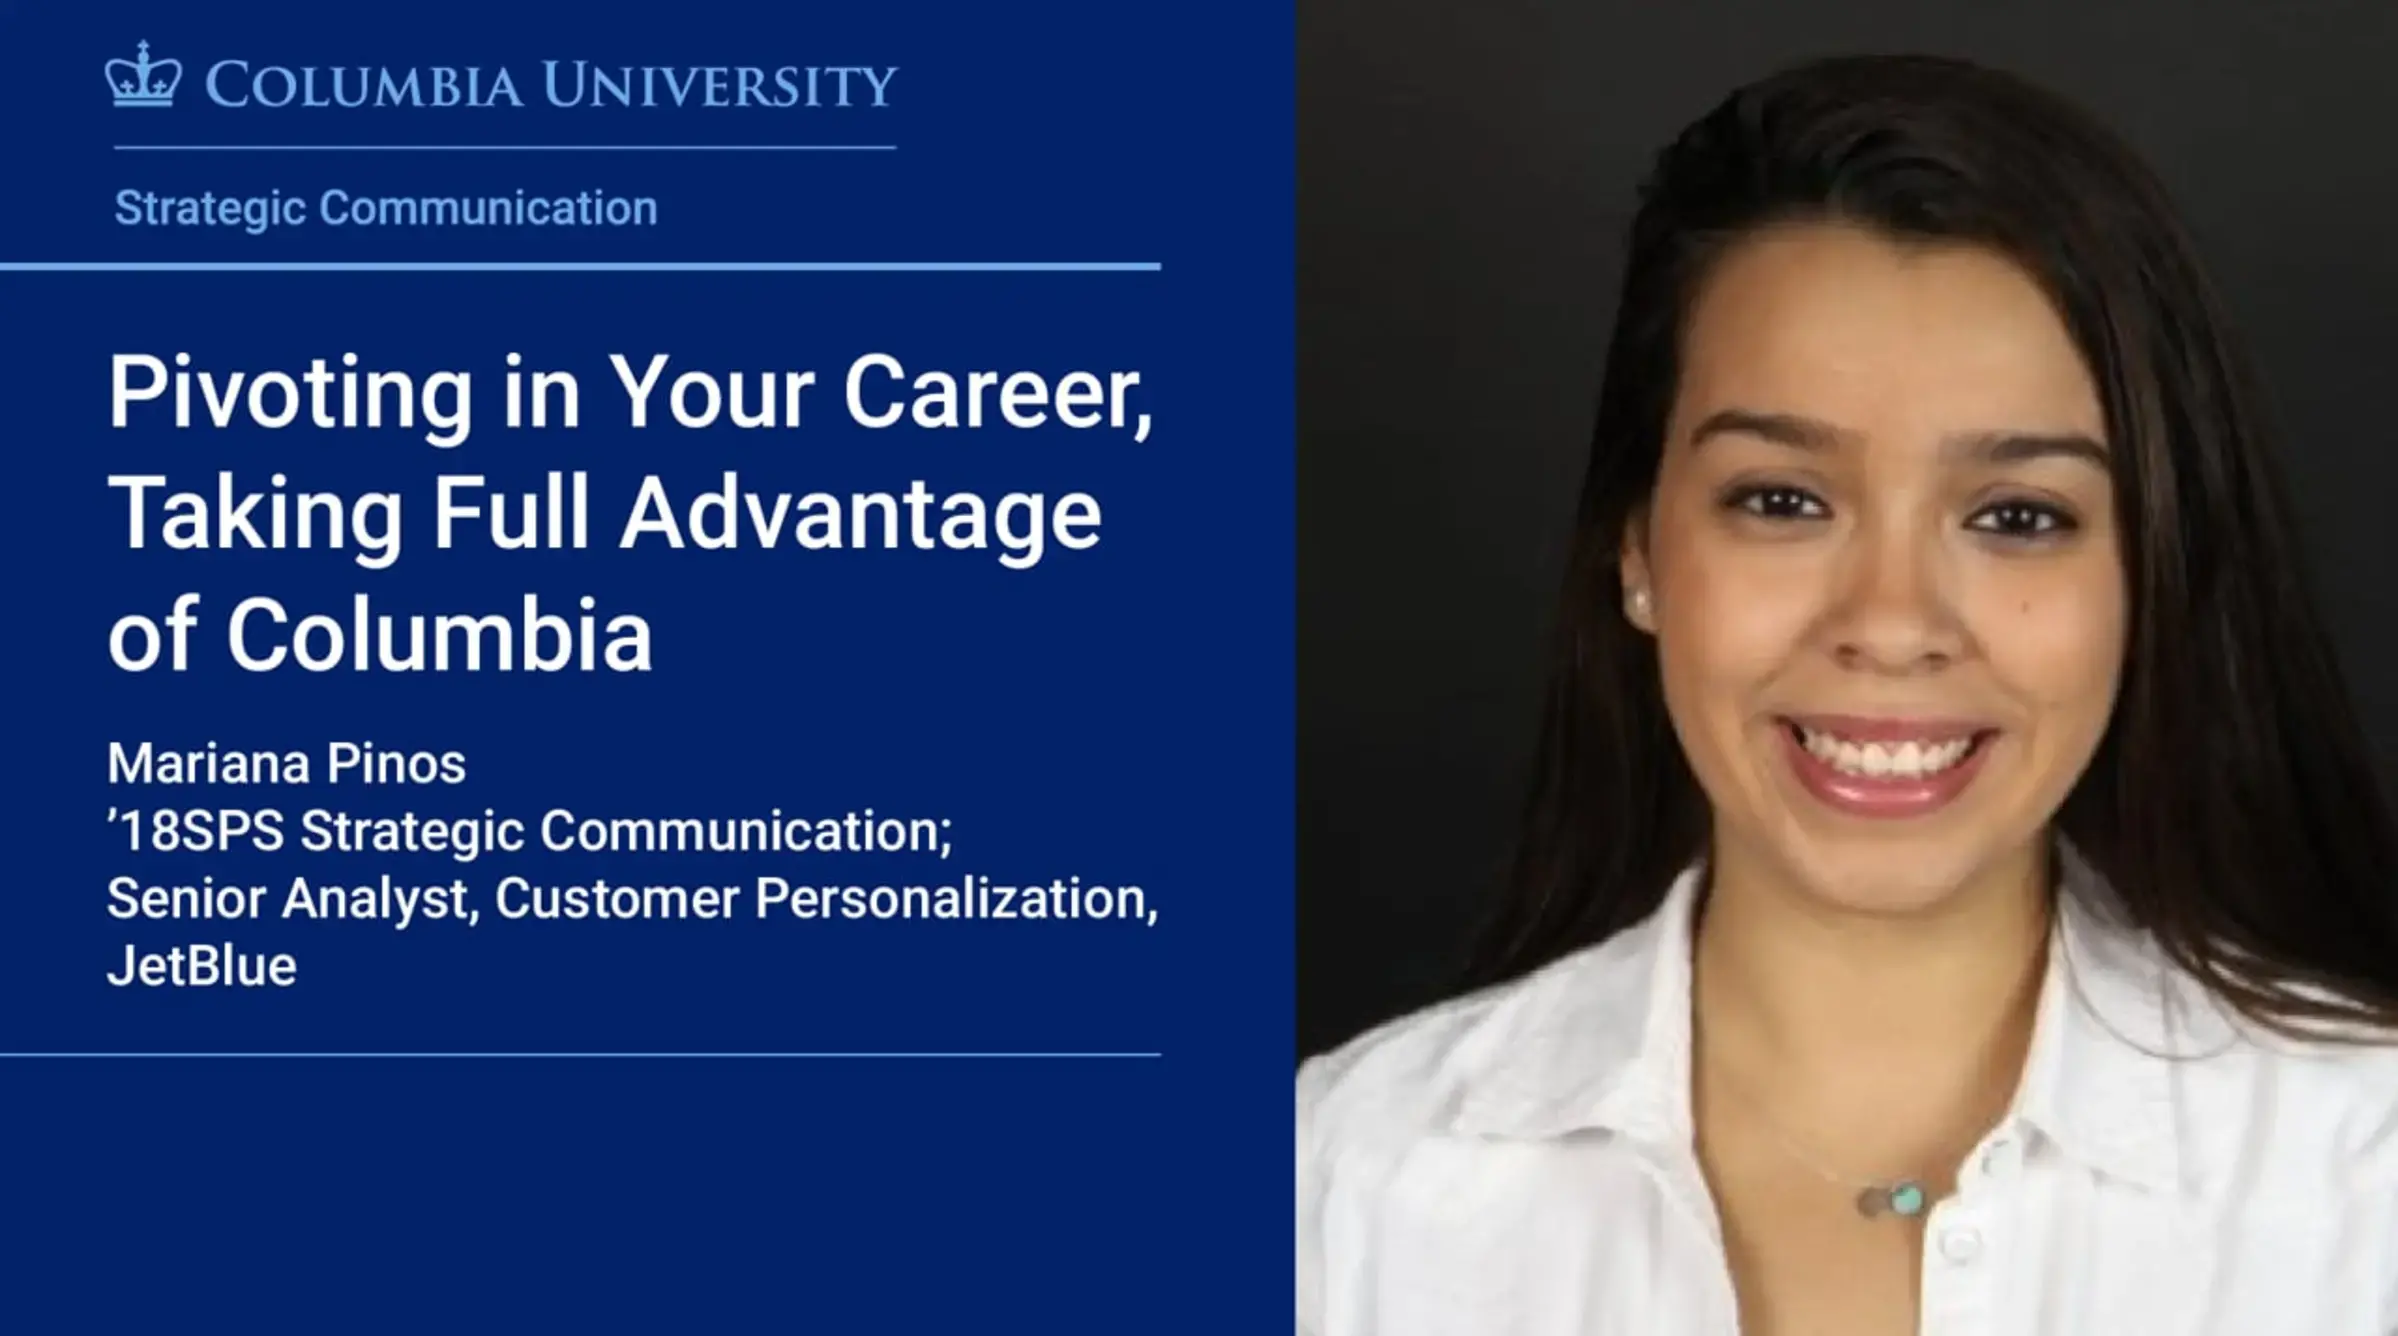 Pivoting in Your Career, Taking Full Advantage of Columbia - Mariana Pinos, ’18SPS Strategic Communication